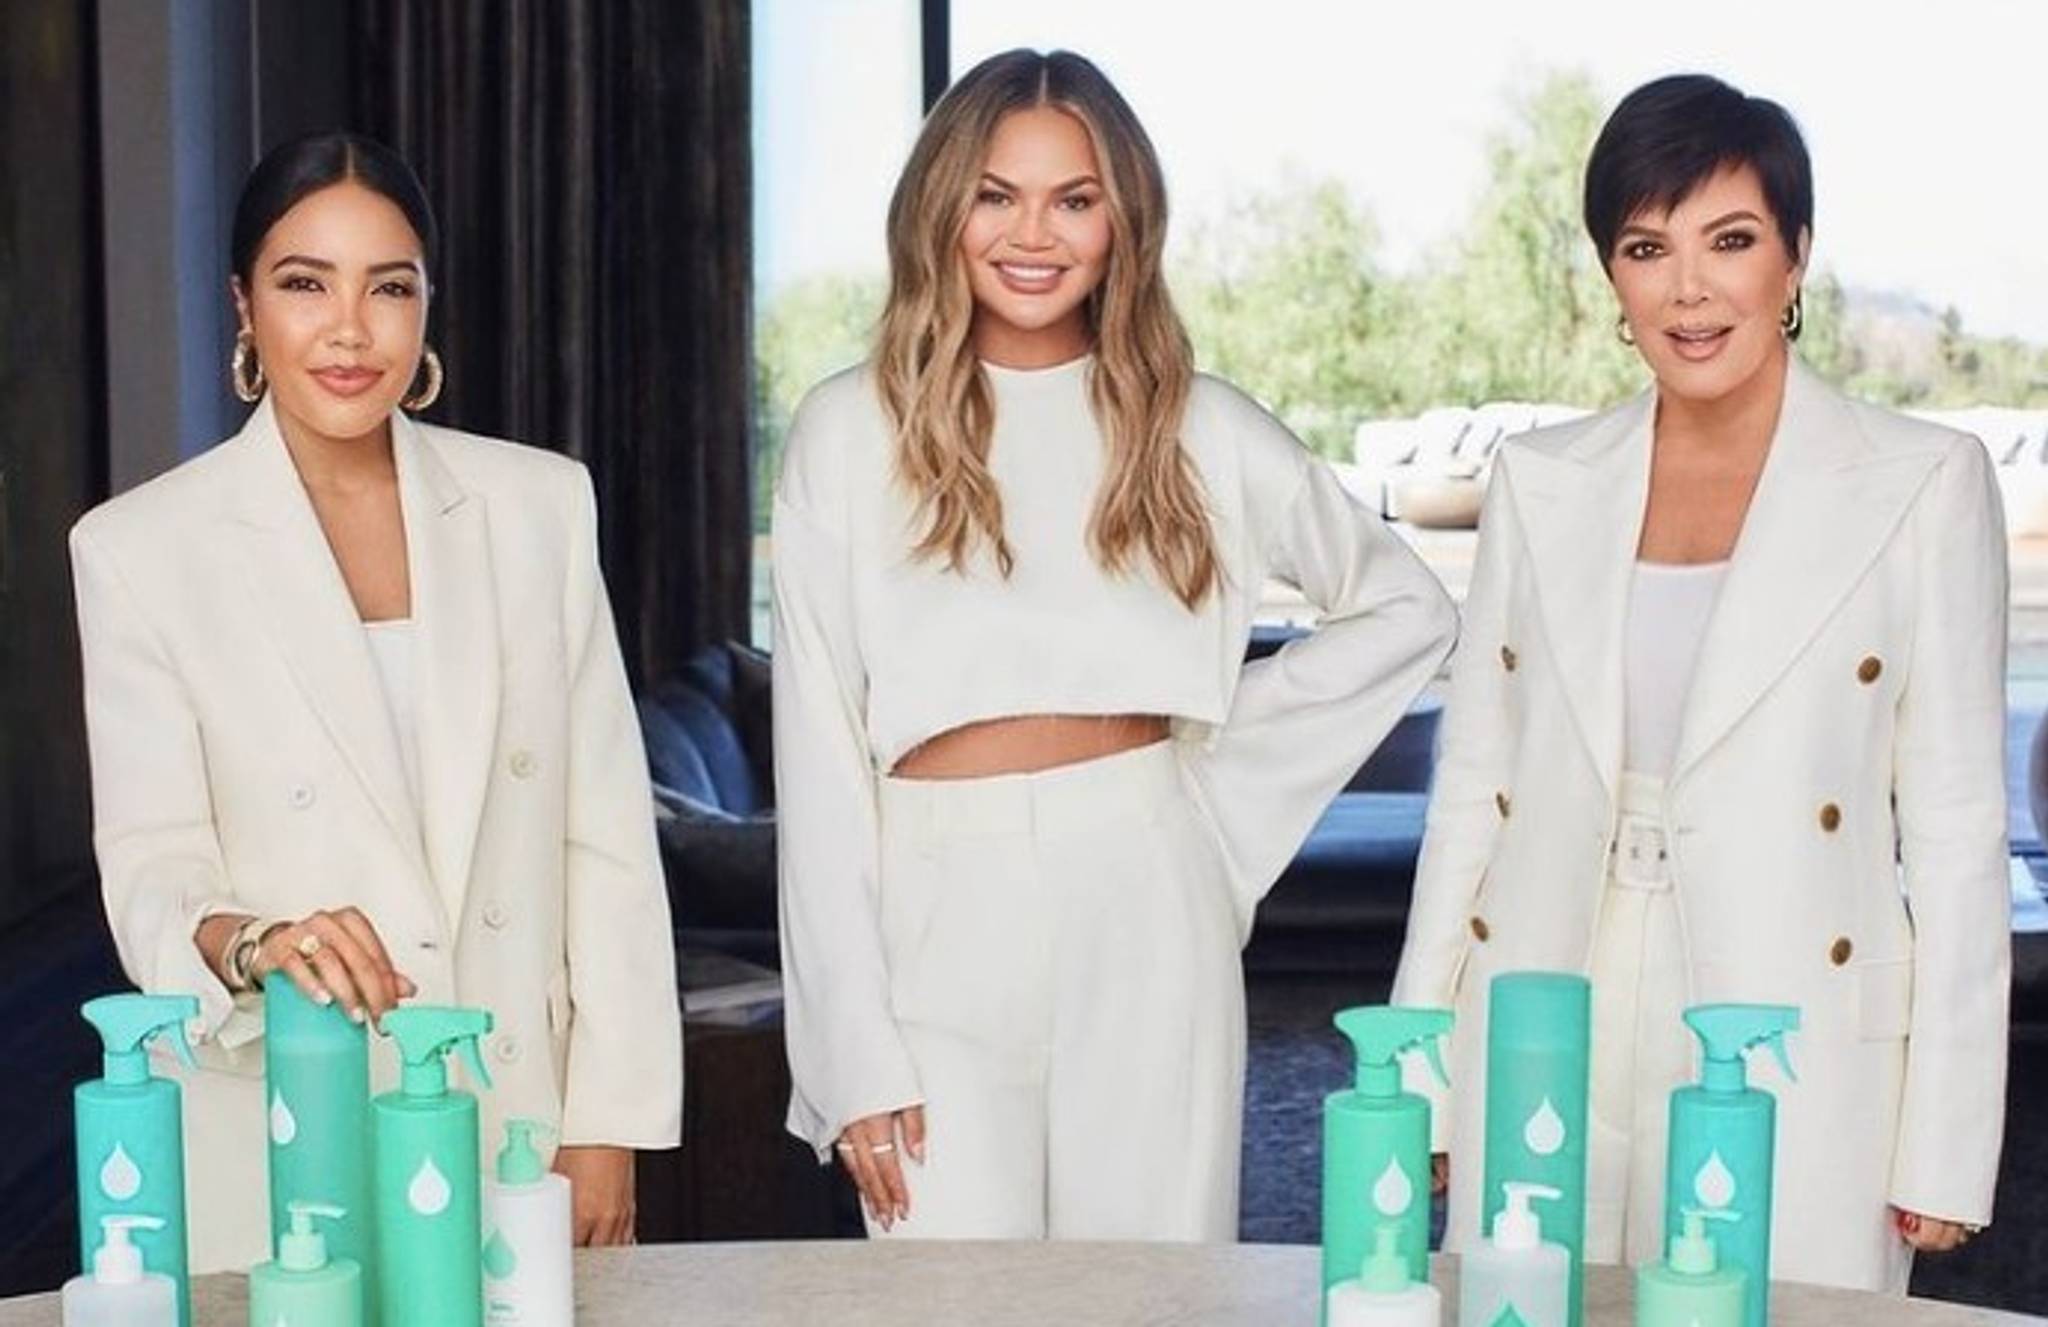 Kardashian cleaning brand ignores chore exhaustion